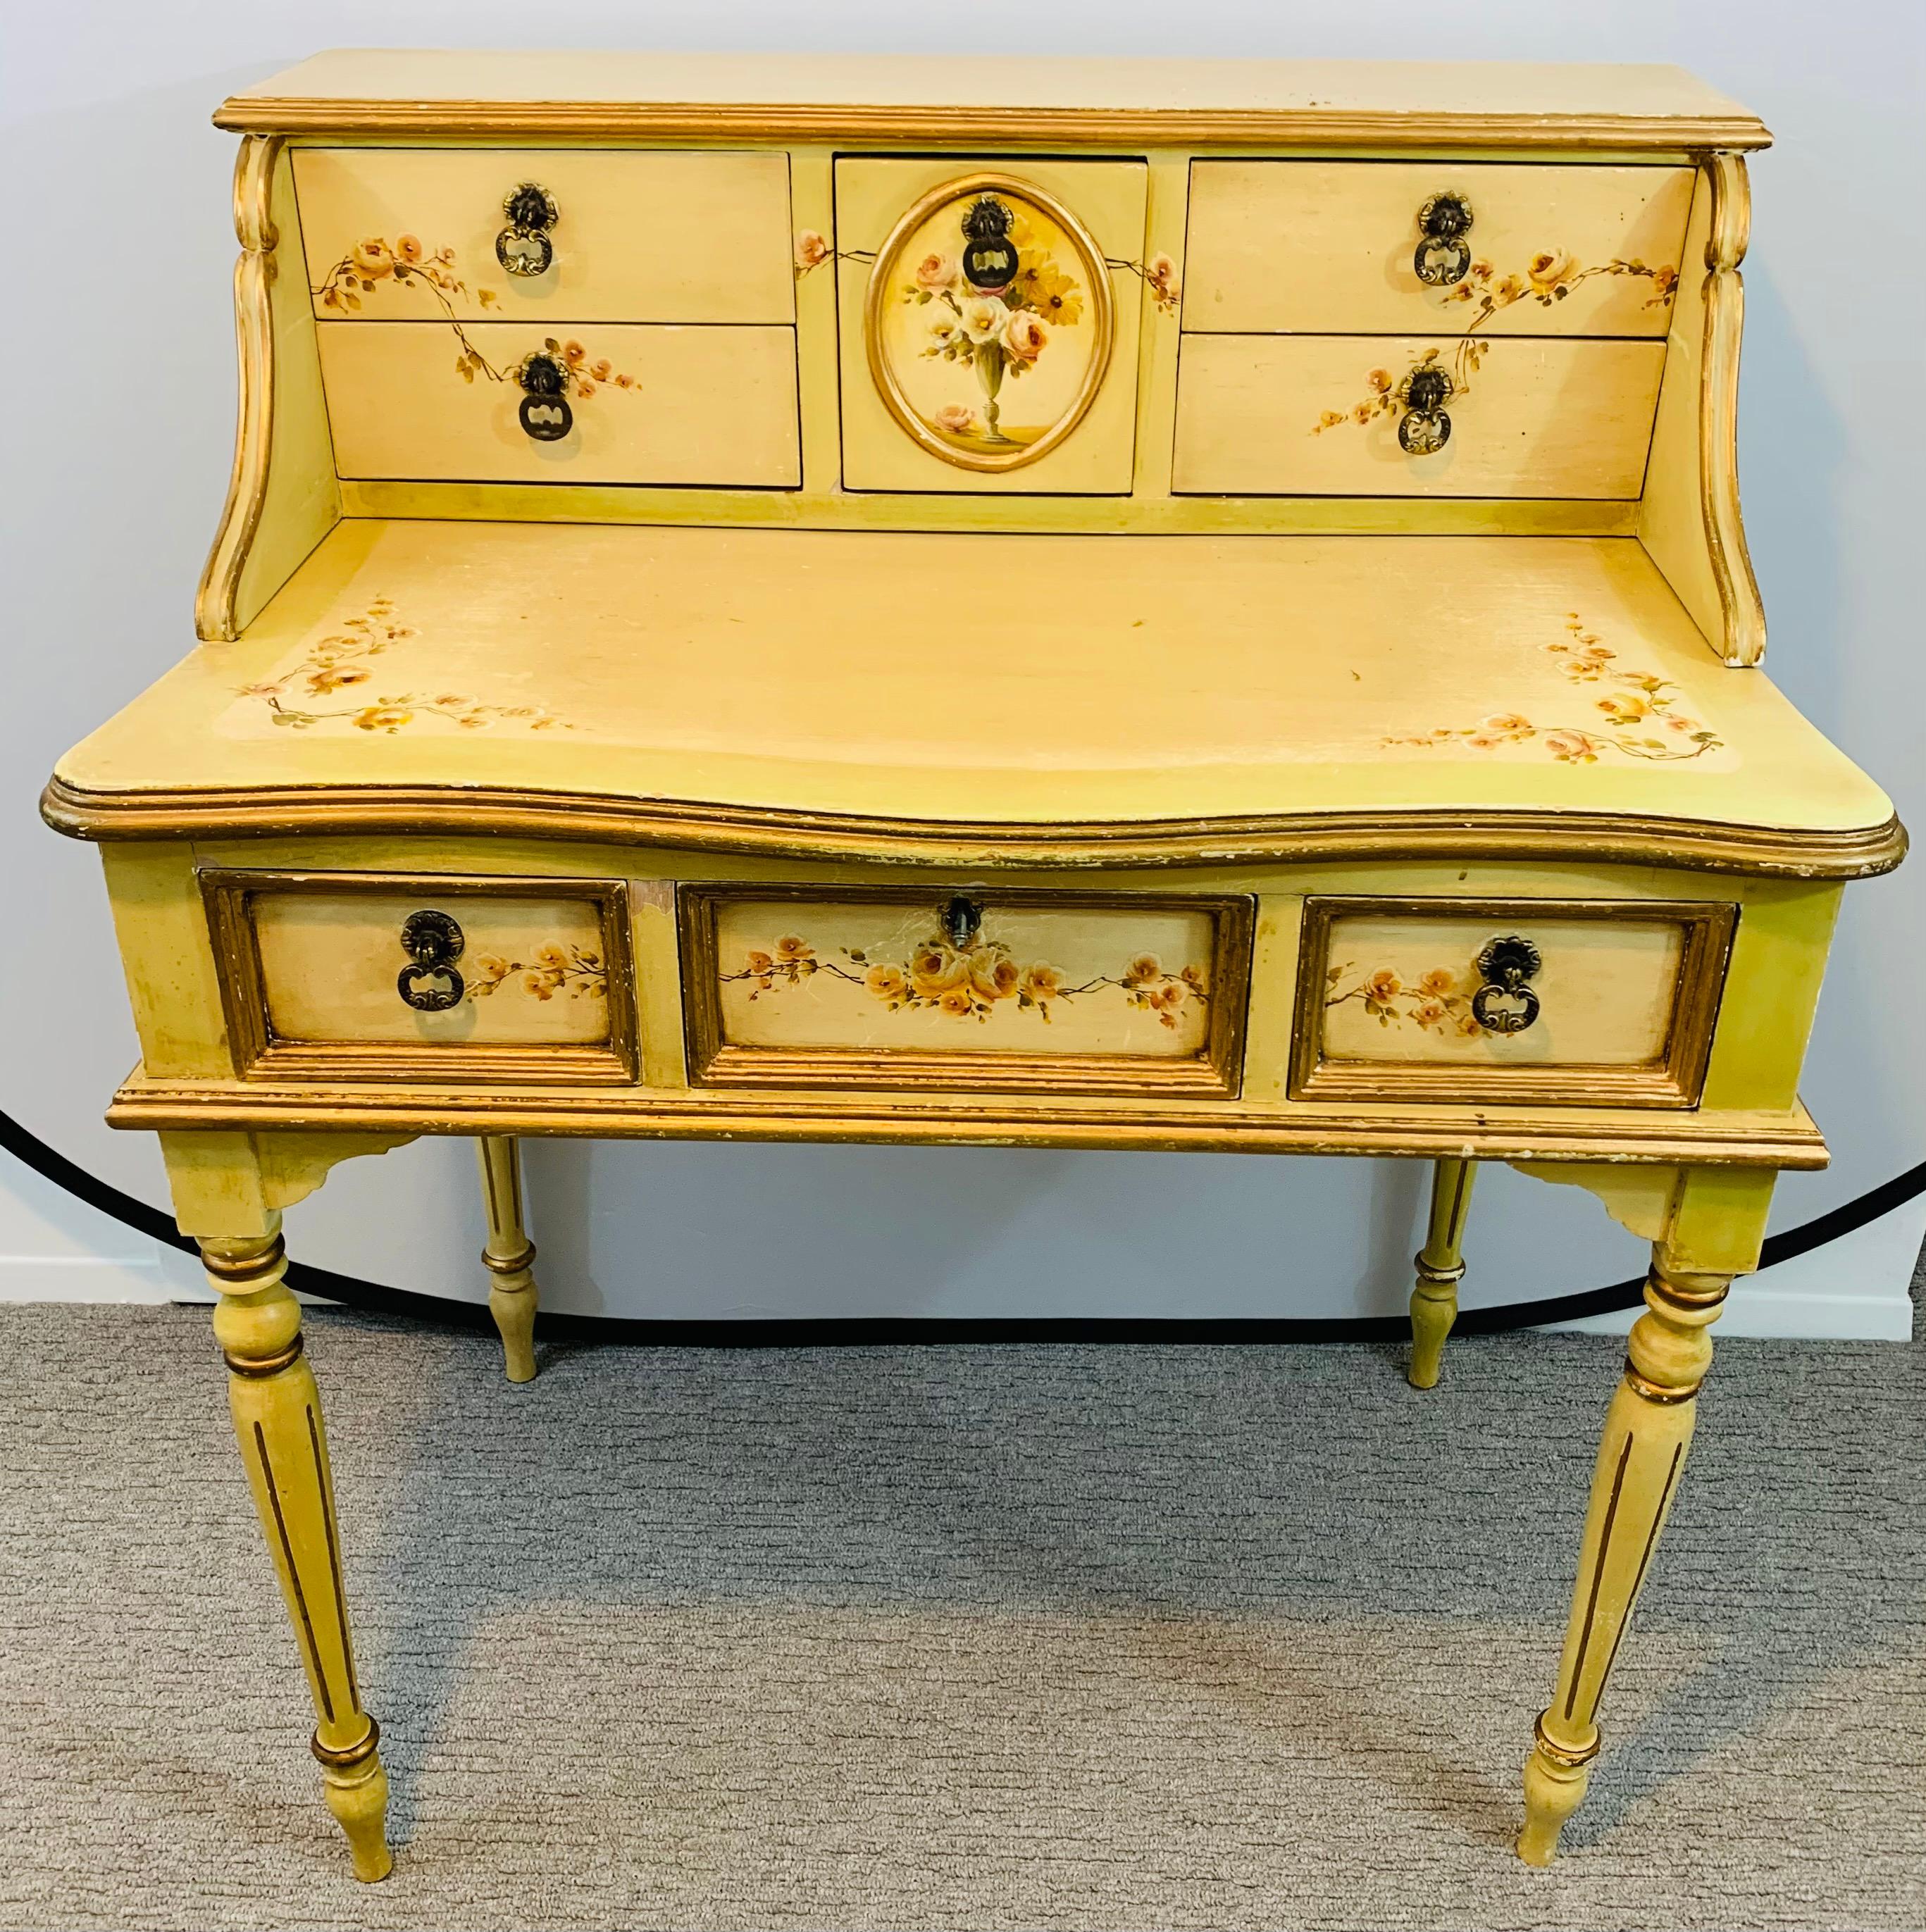 An exquisite hand painted French lady desk with a matching chair. The desk features Fine wood carving, elegant hand painted flower motifs on the front and sides and multiple drawers for storage. The top section has 5 drawers and the lower section